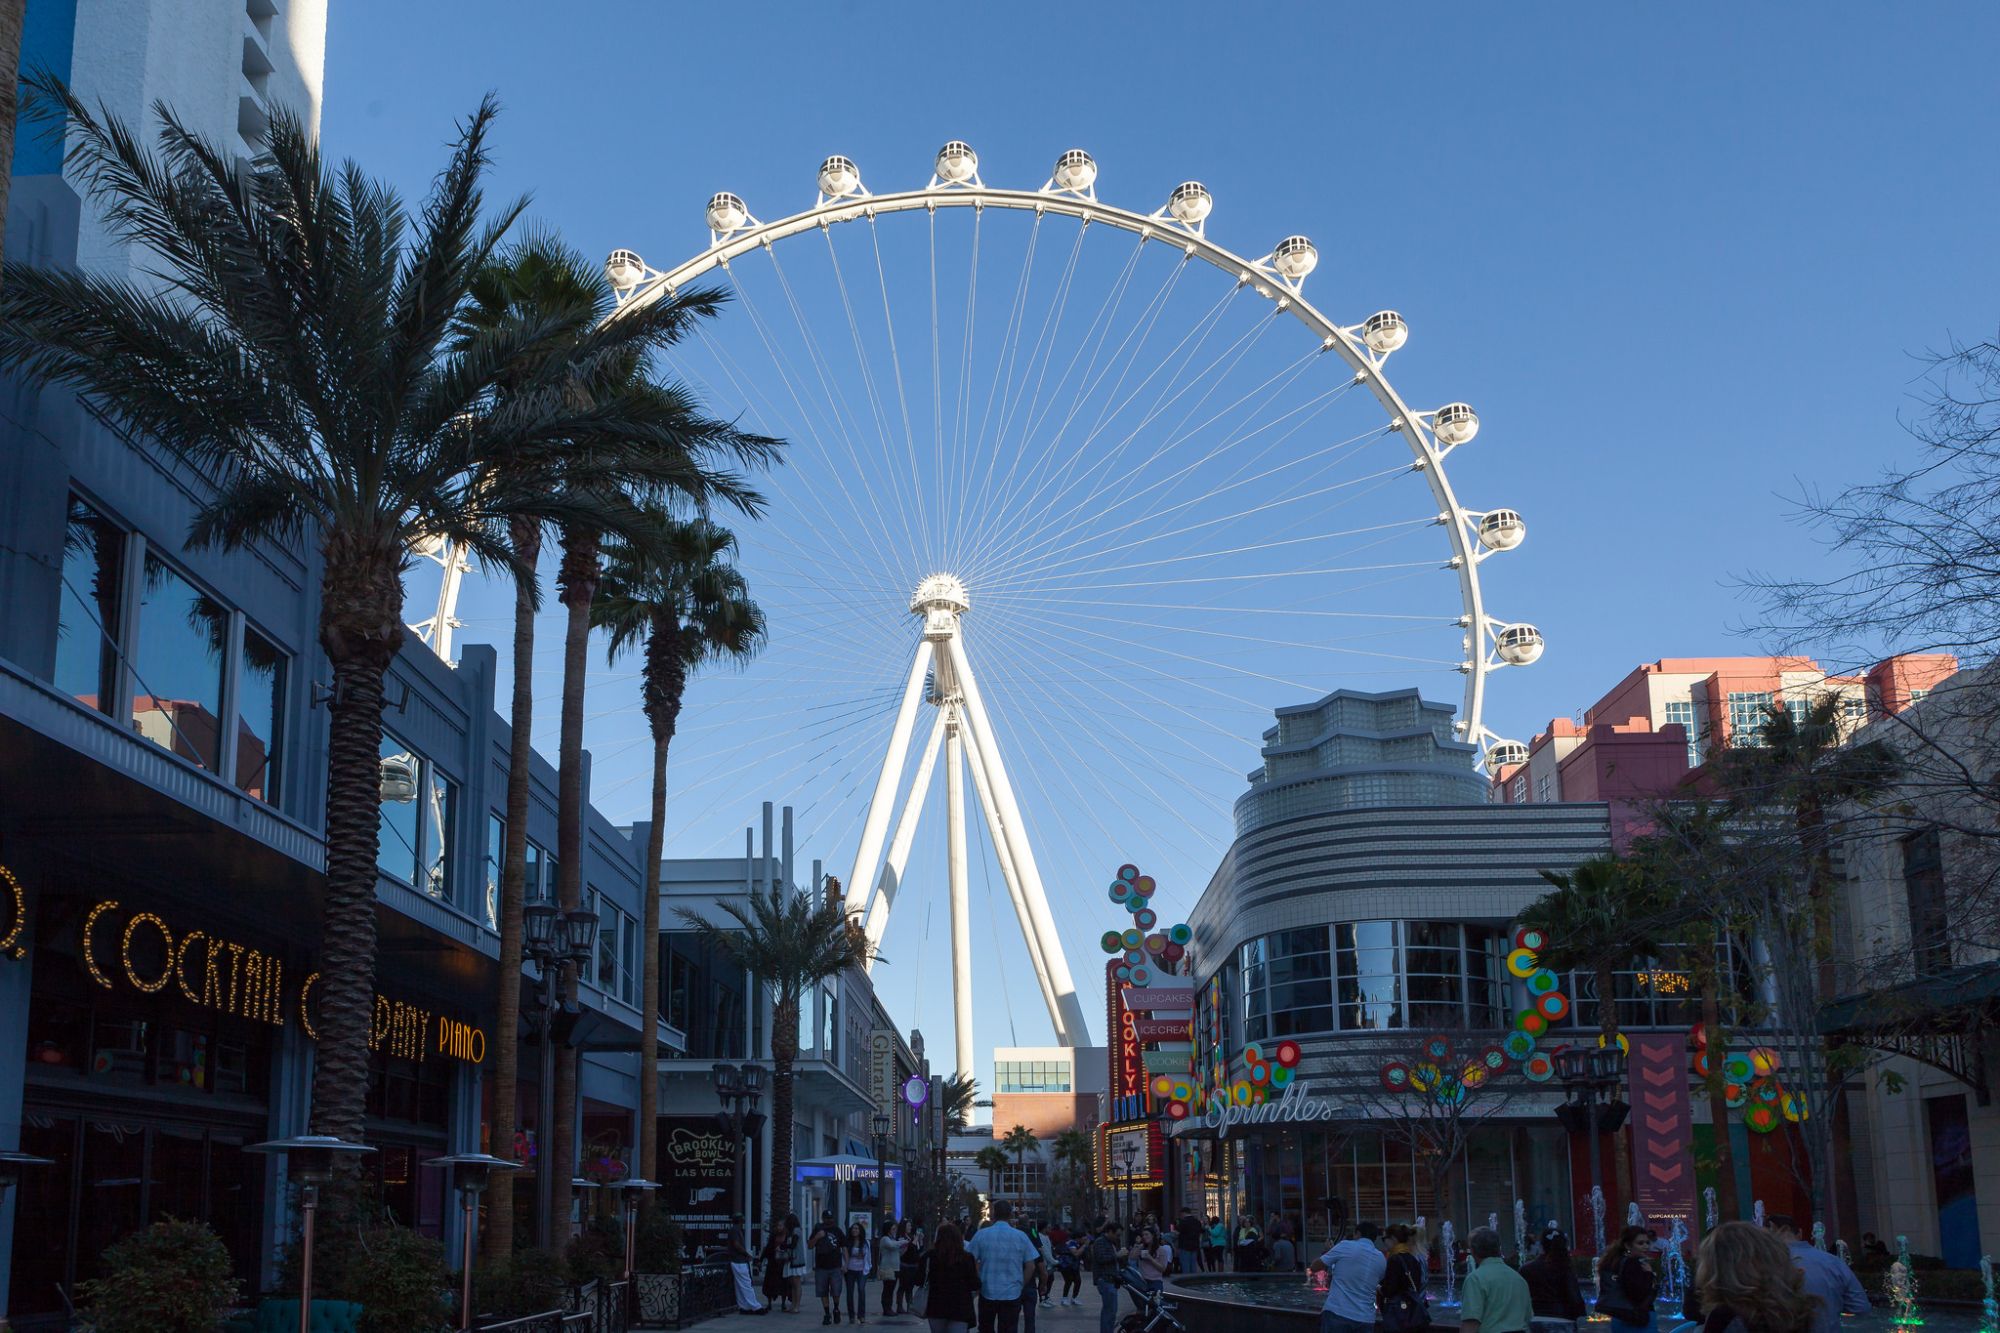 The High Roller